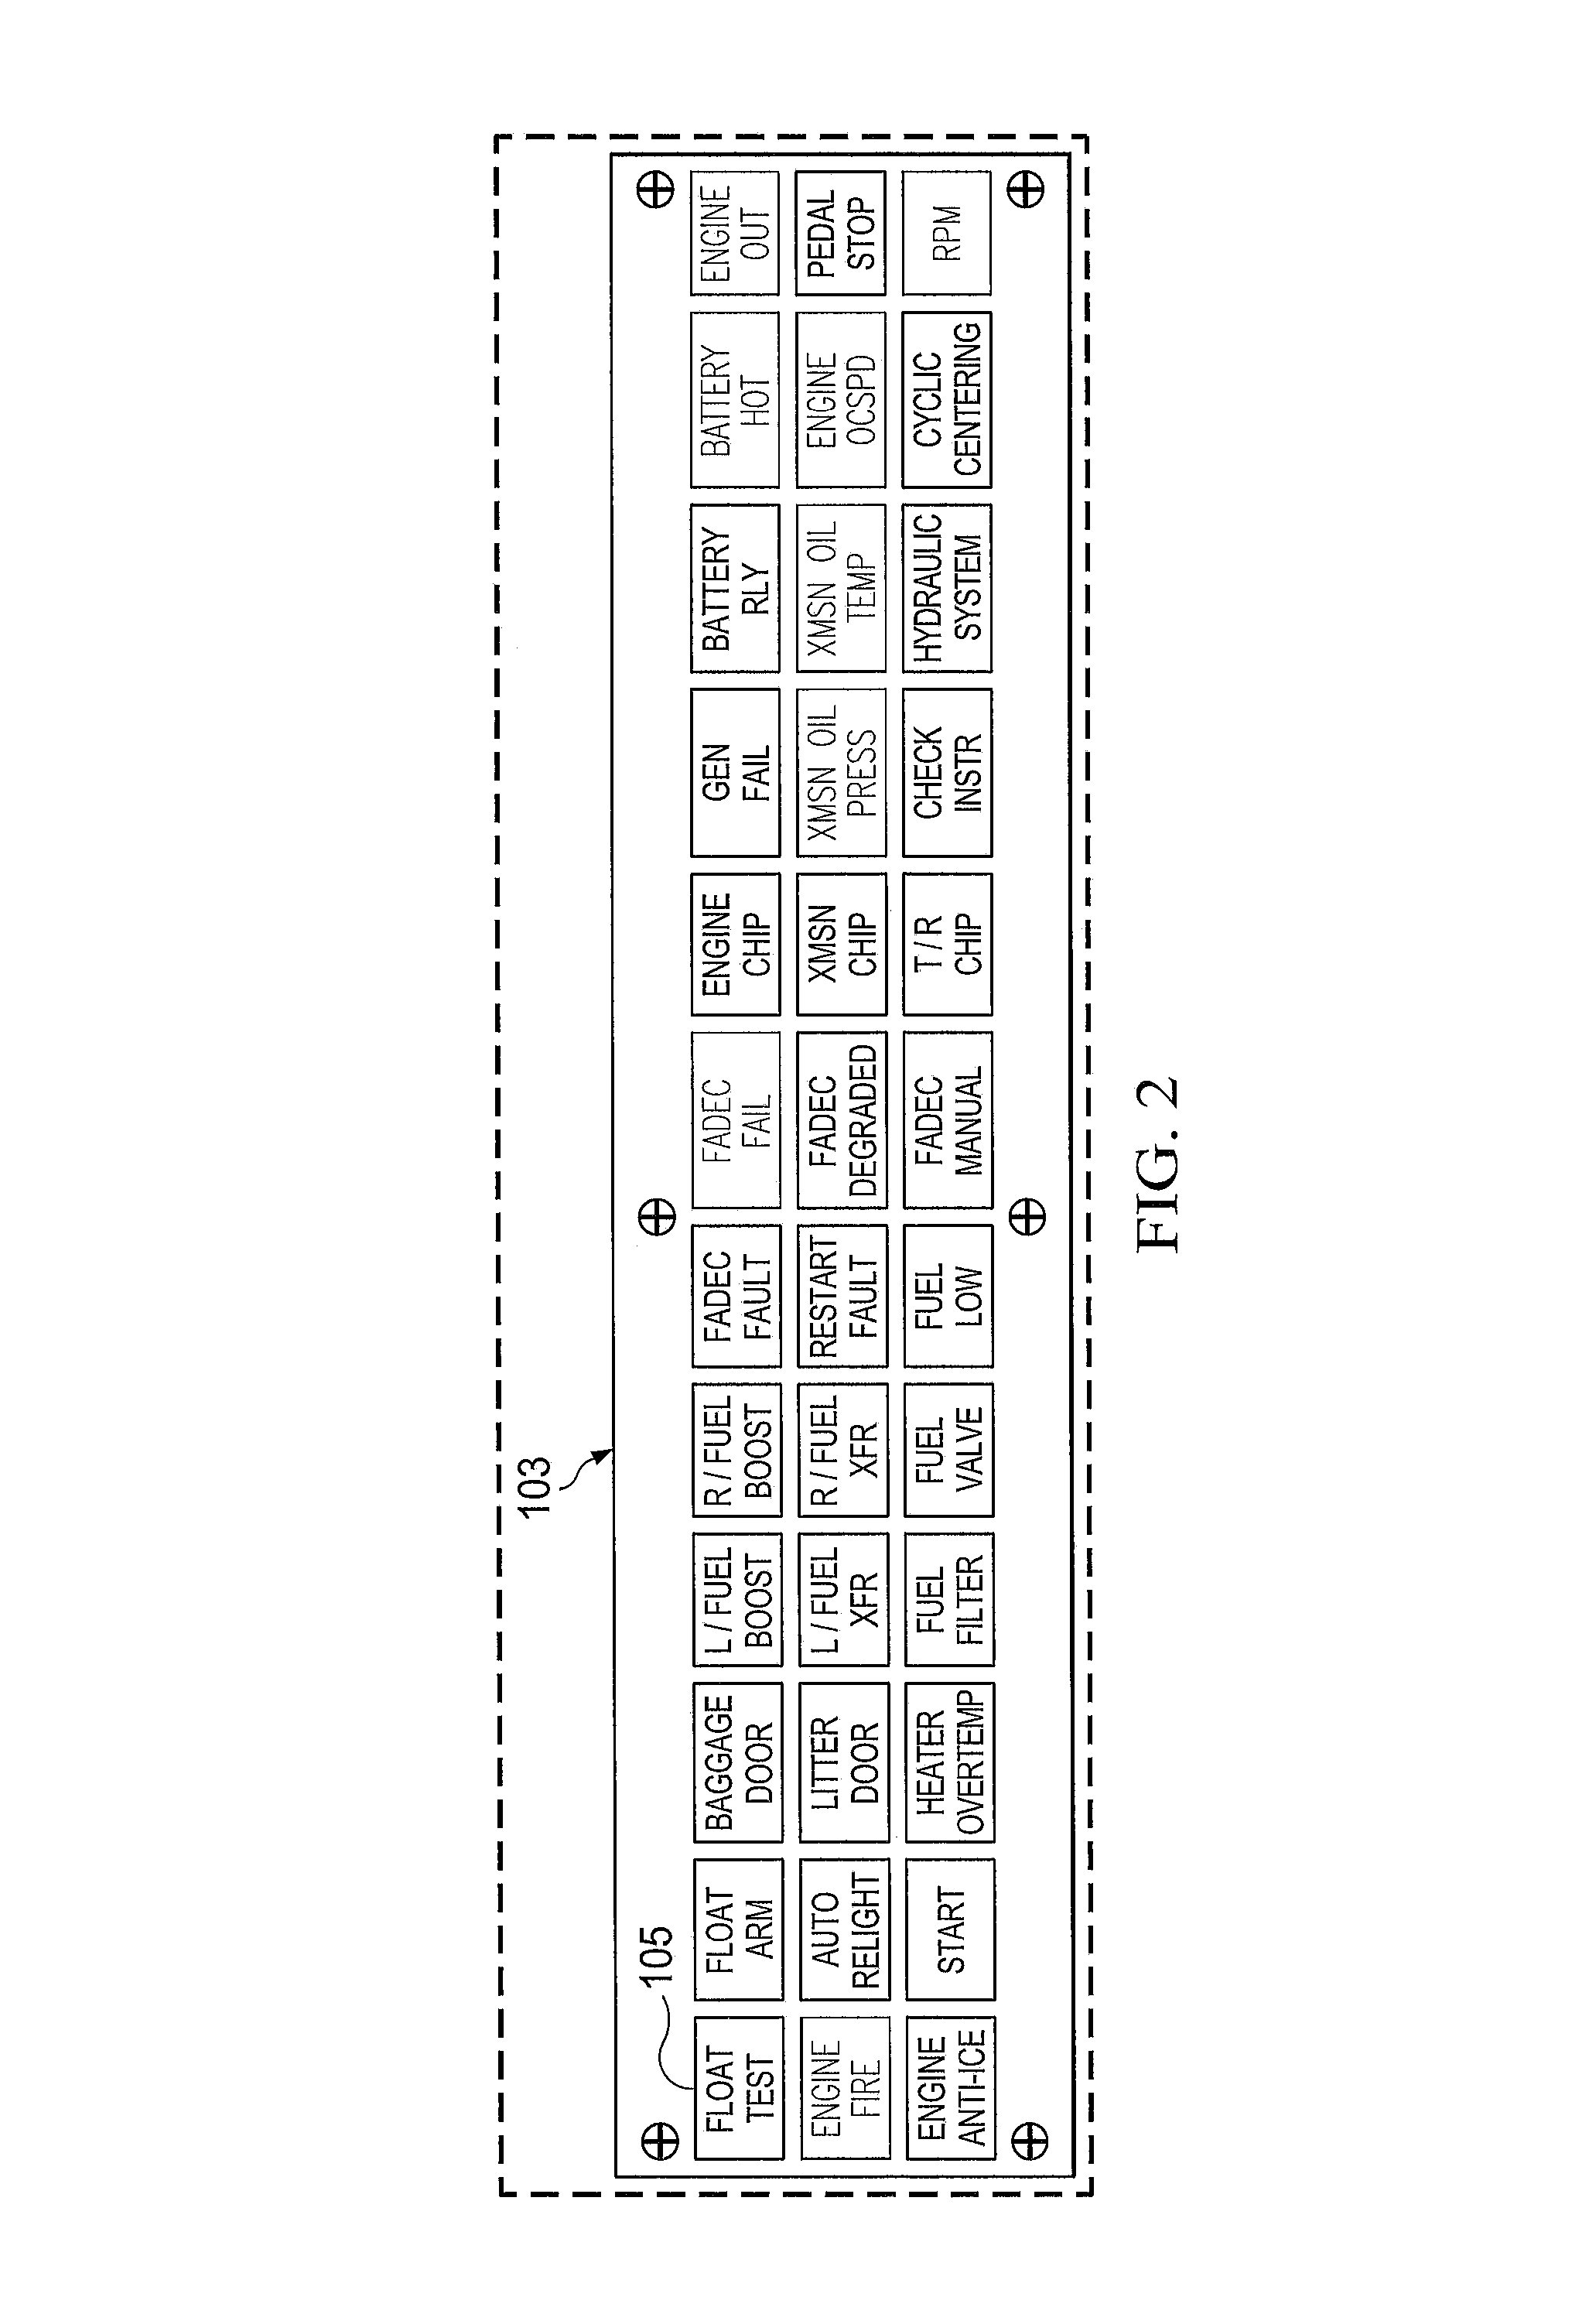 System for optical recognition, interpretation, and digitization of human readable instruments, annunciators, and controls